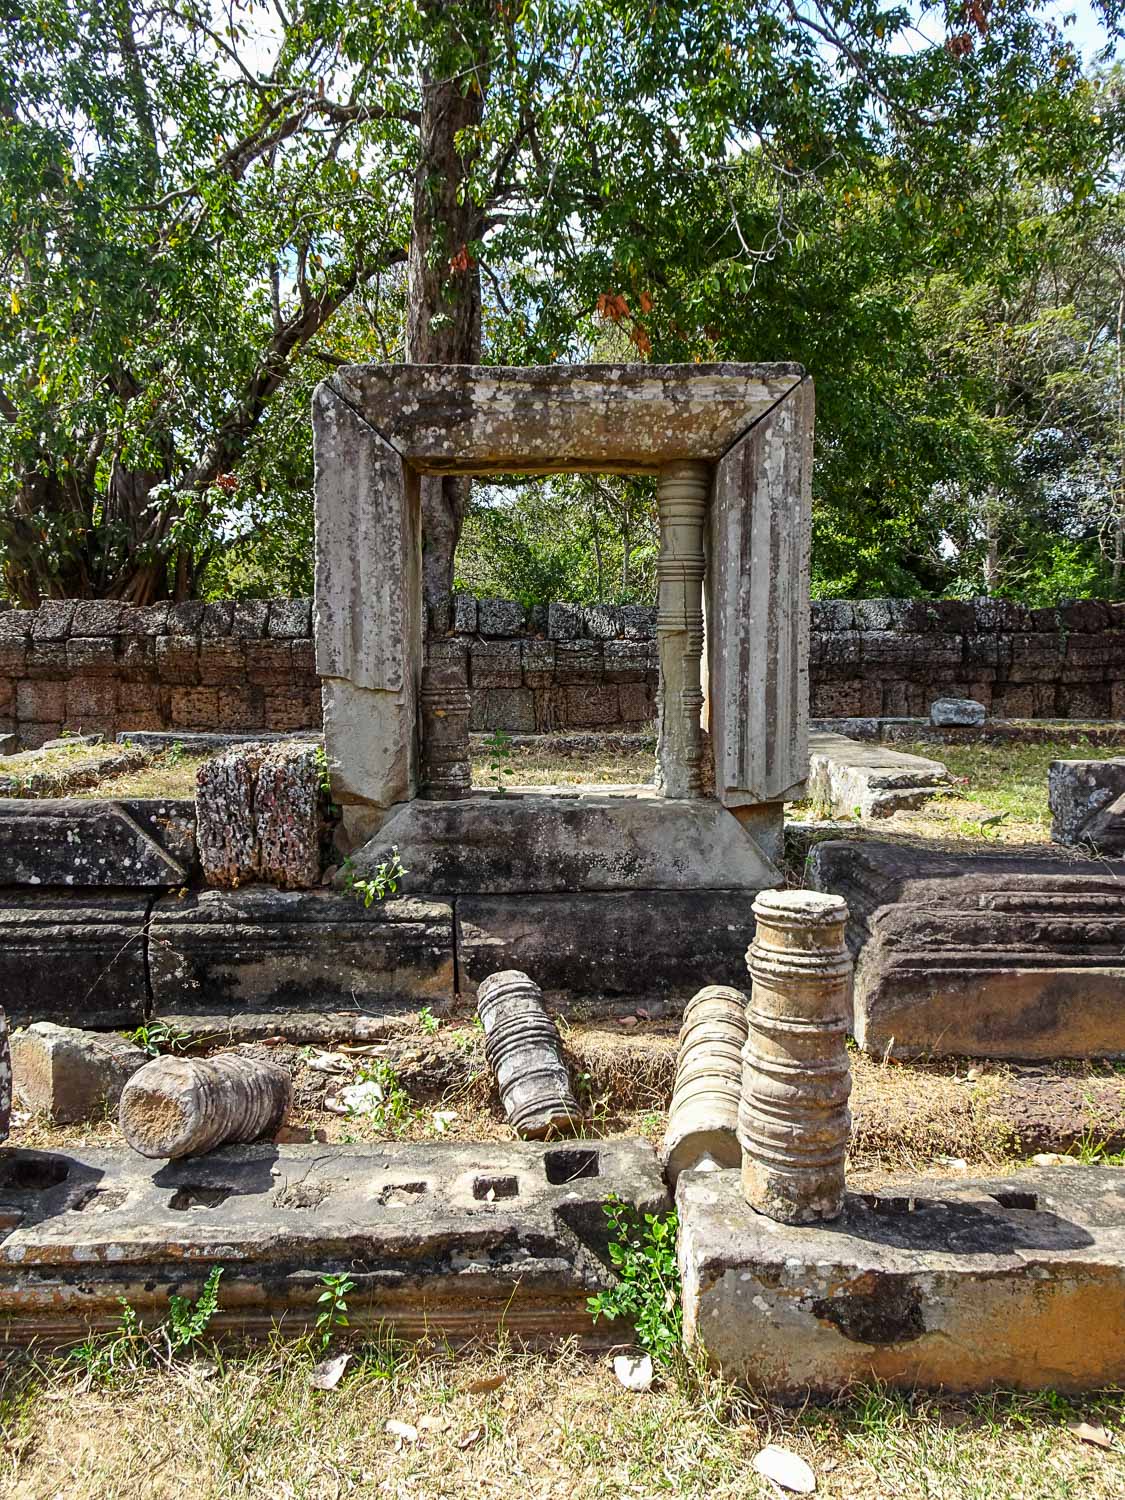 Ruins on the grounds of East Mebon